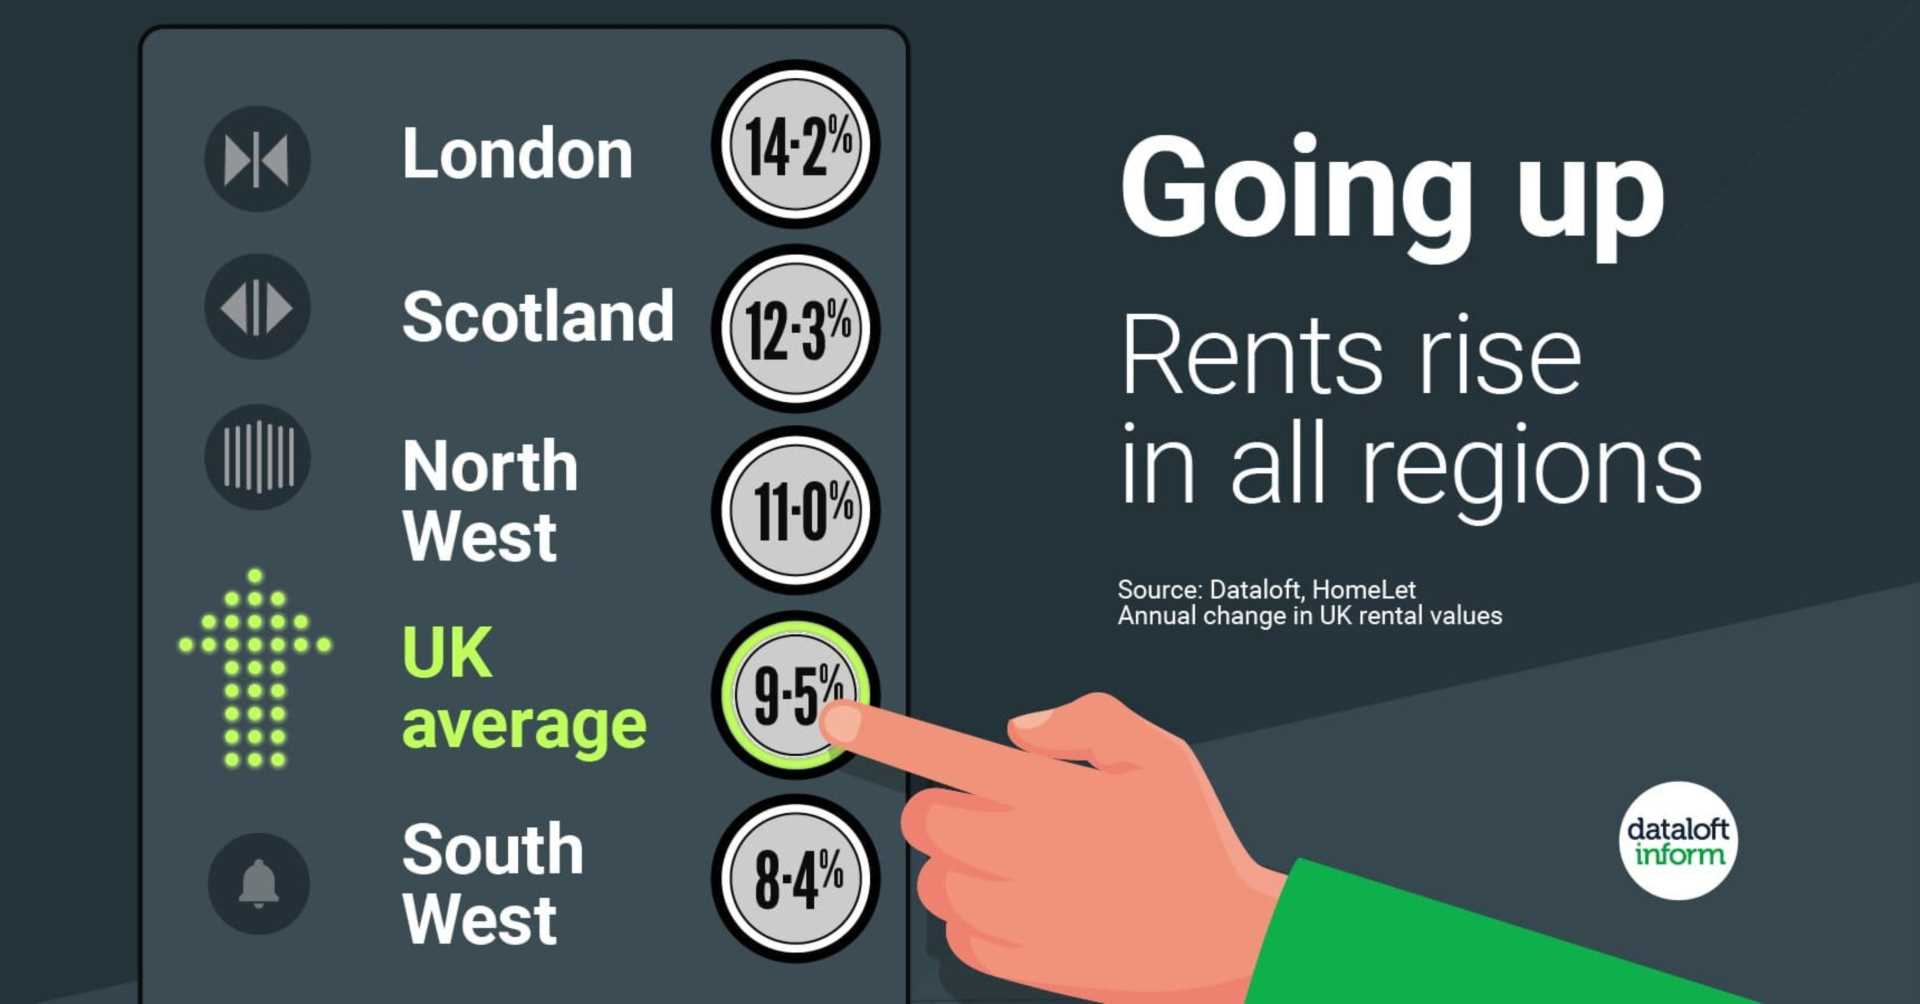 Going up: rents rise in all regions